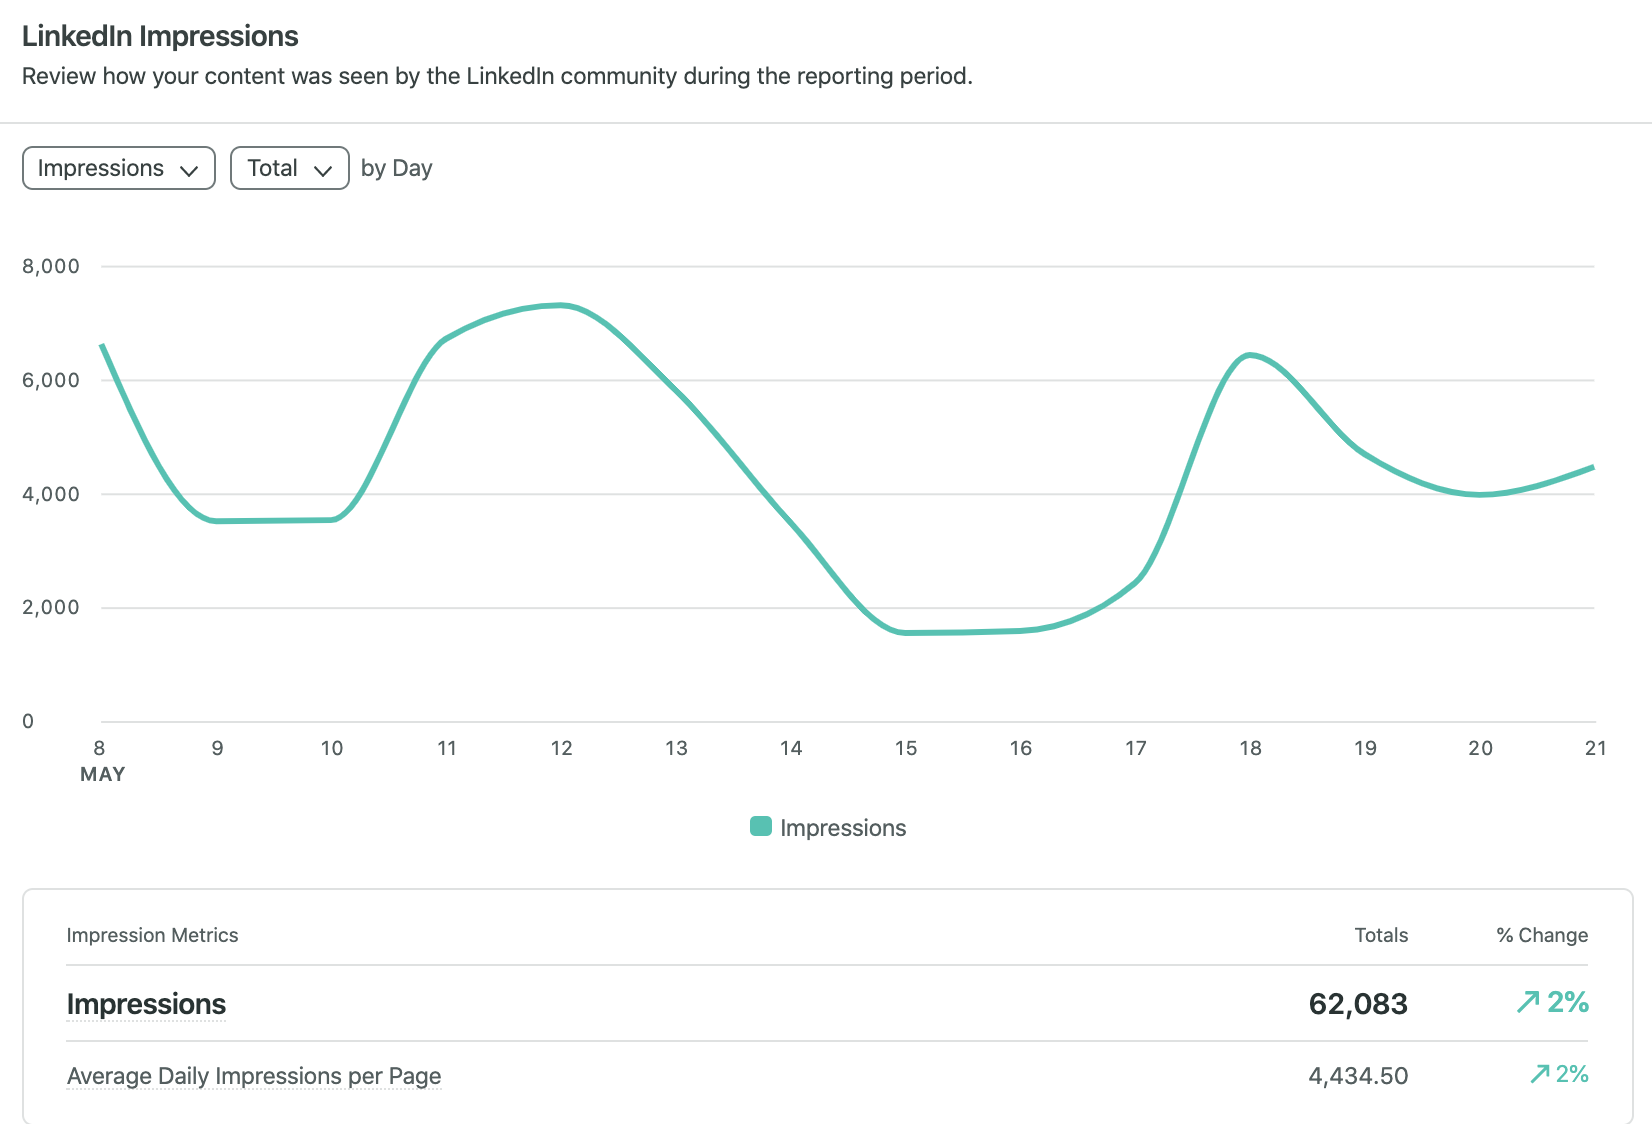 Sprout Social's LinkedIn Report shows impressions as a line chart and table, highlighting how many times your content was seen during the reporting period.